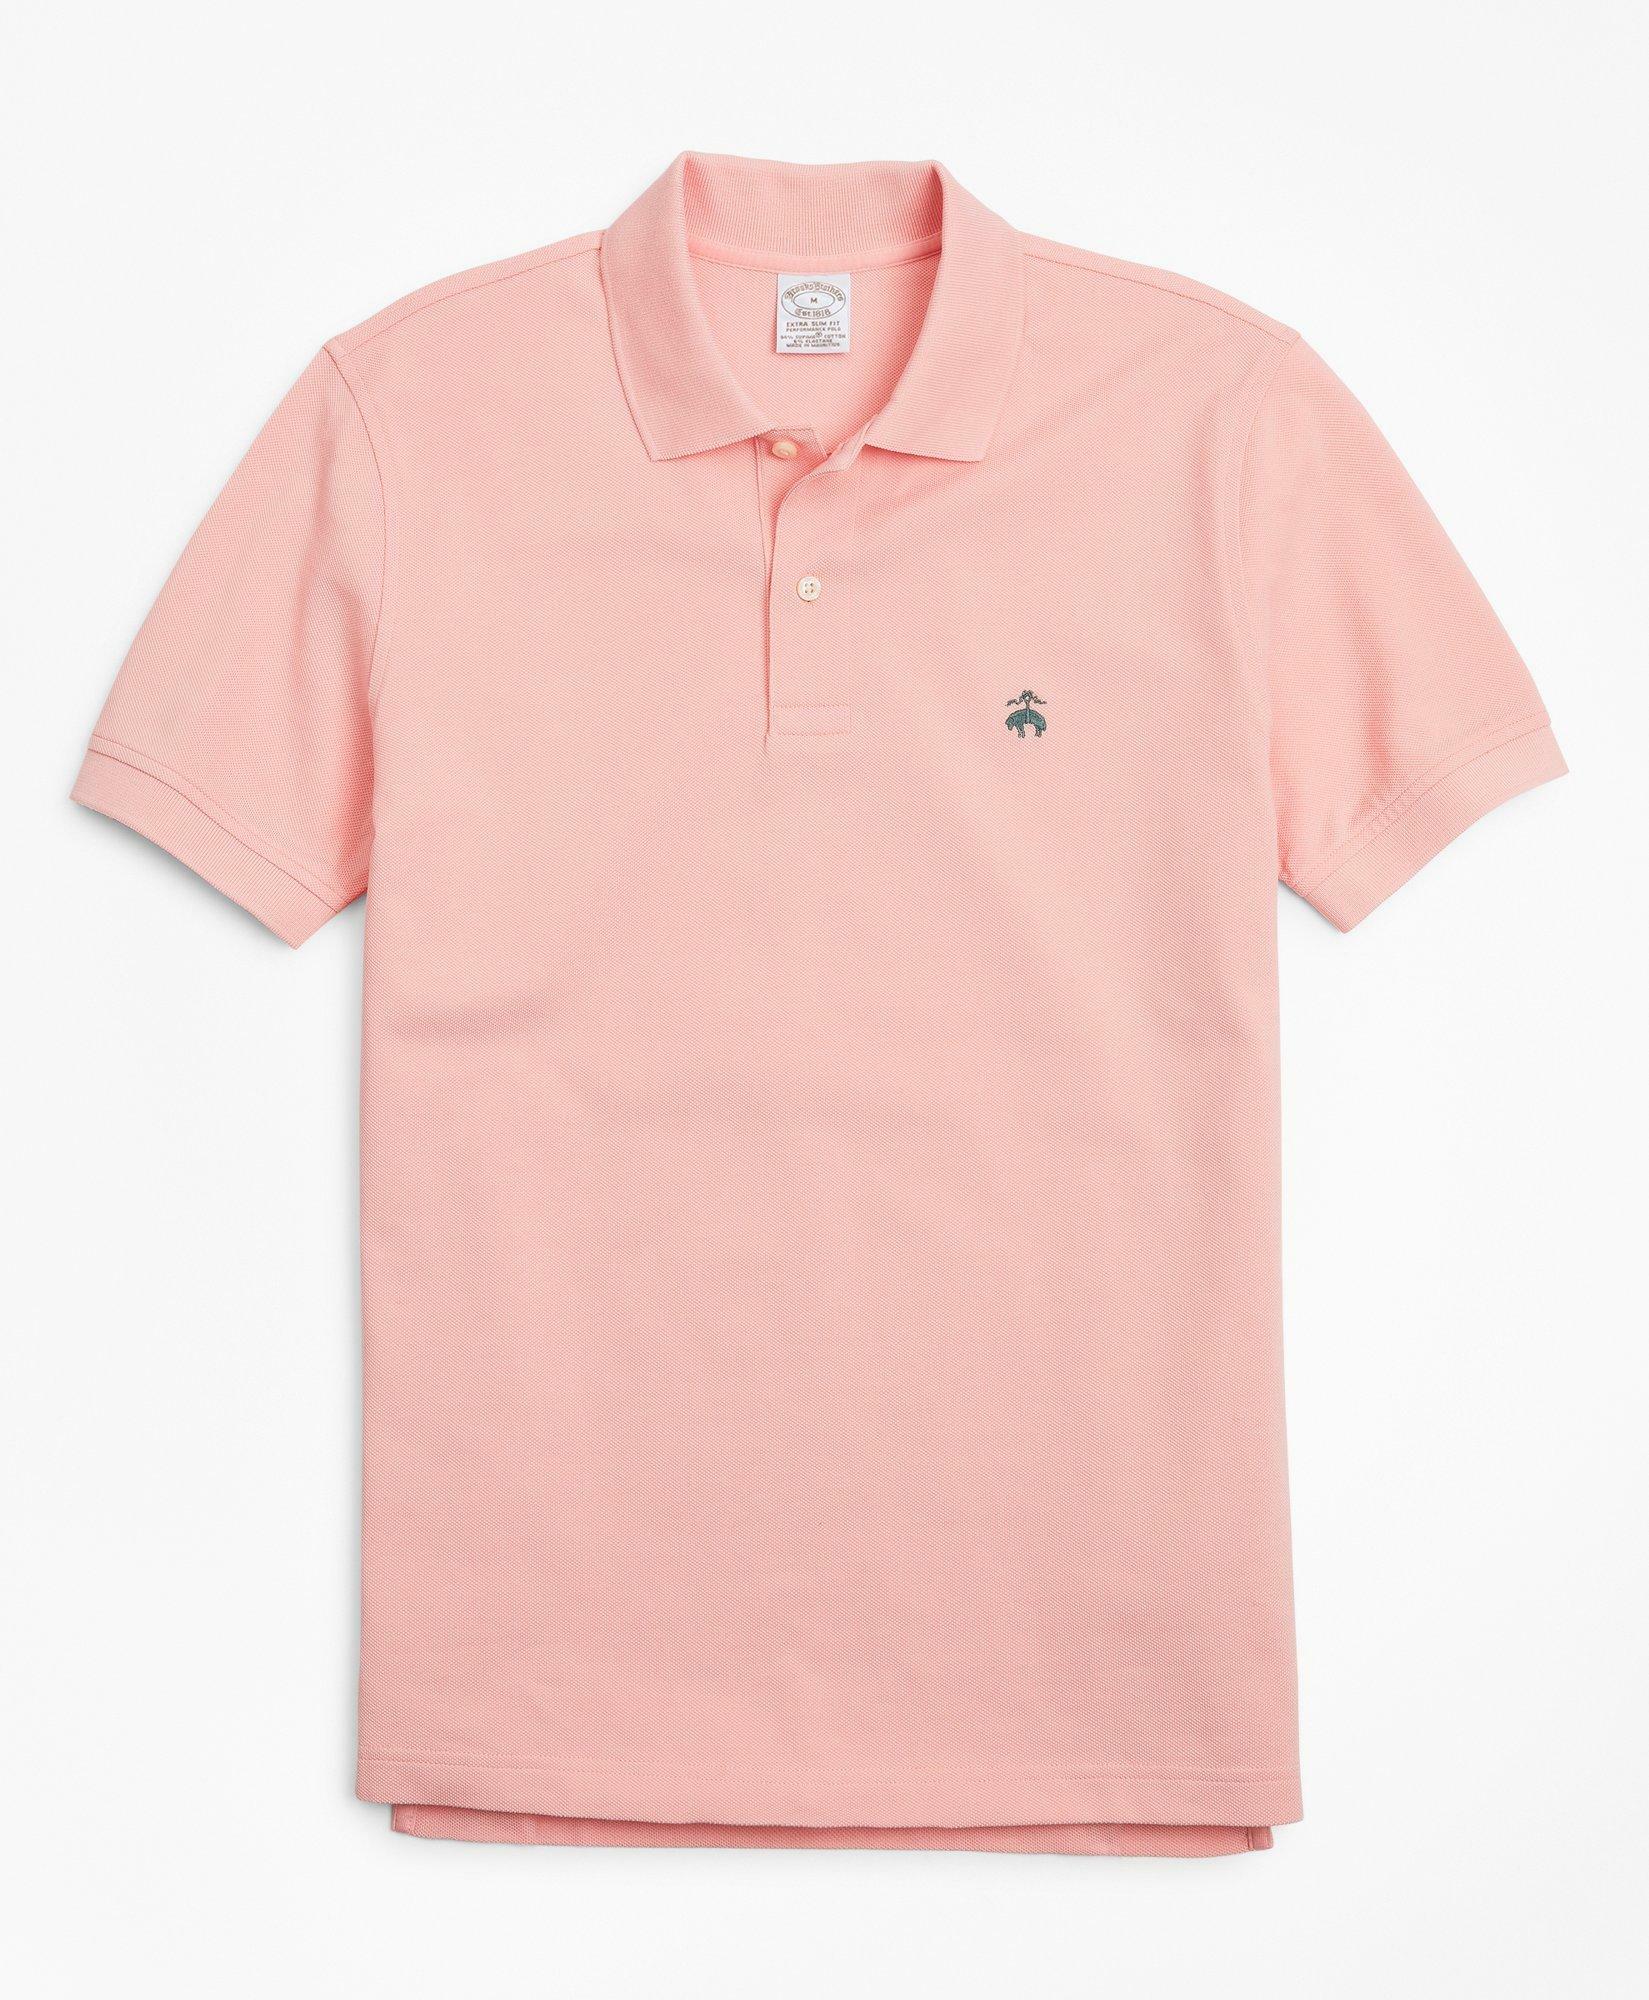 Brooks Brothers Men's Golden Fleece Extra-Slim Fit Stretch Supima Polo Shirt | Soft Pink